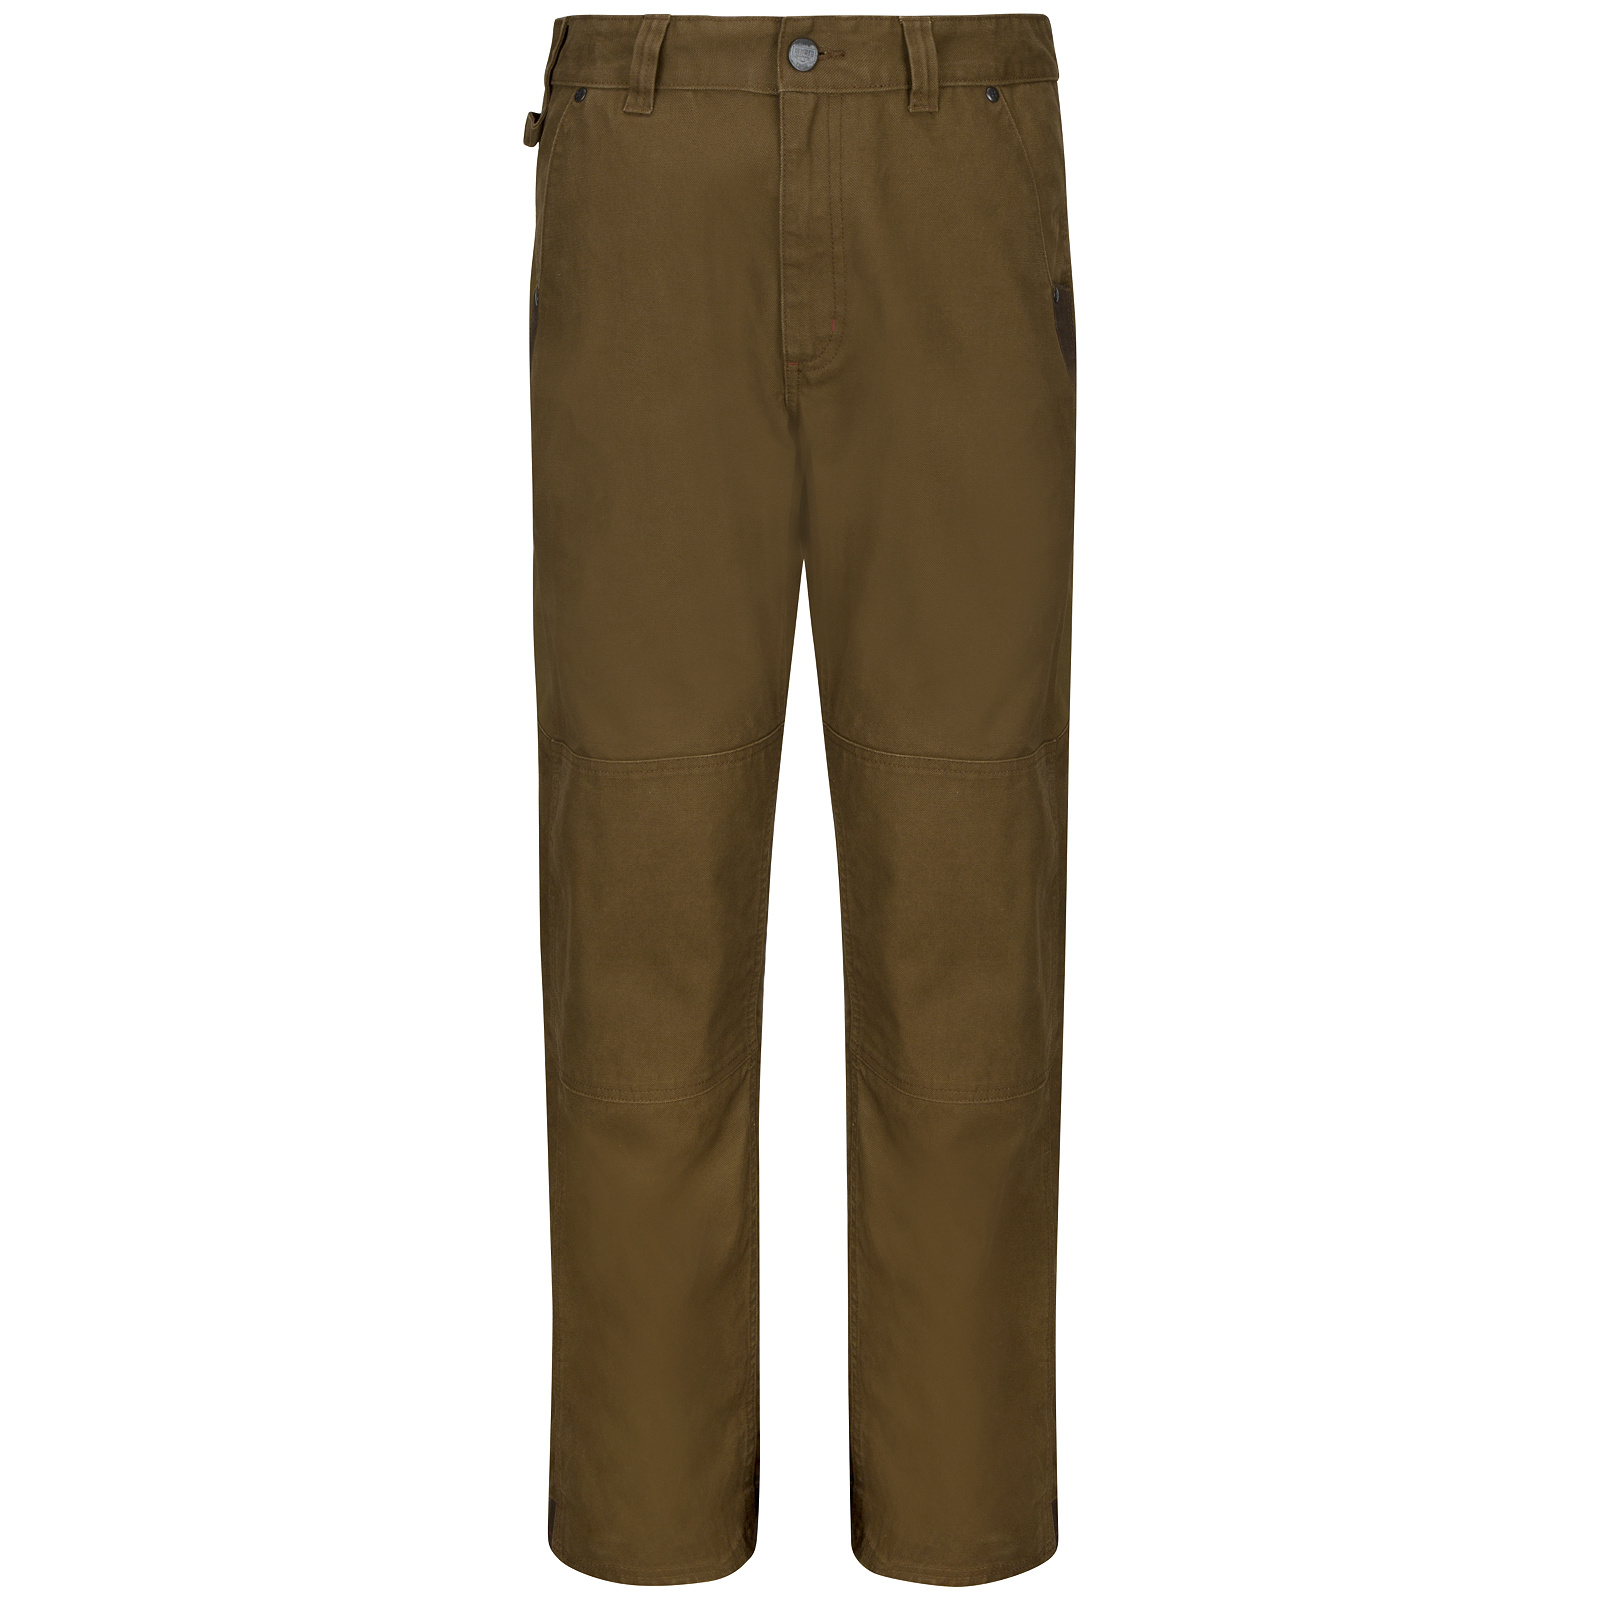 Red Kap Utility Work Pant with MIMIX Technology